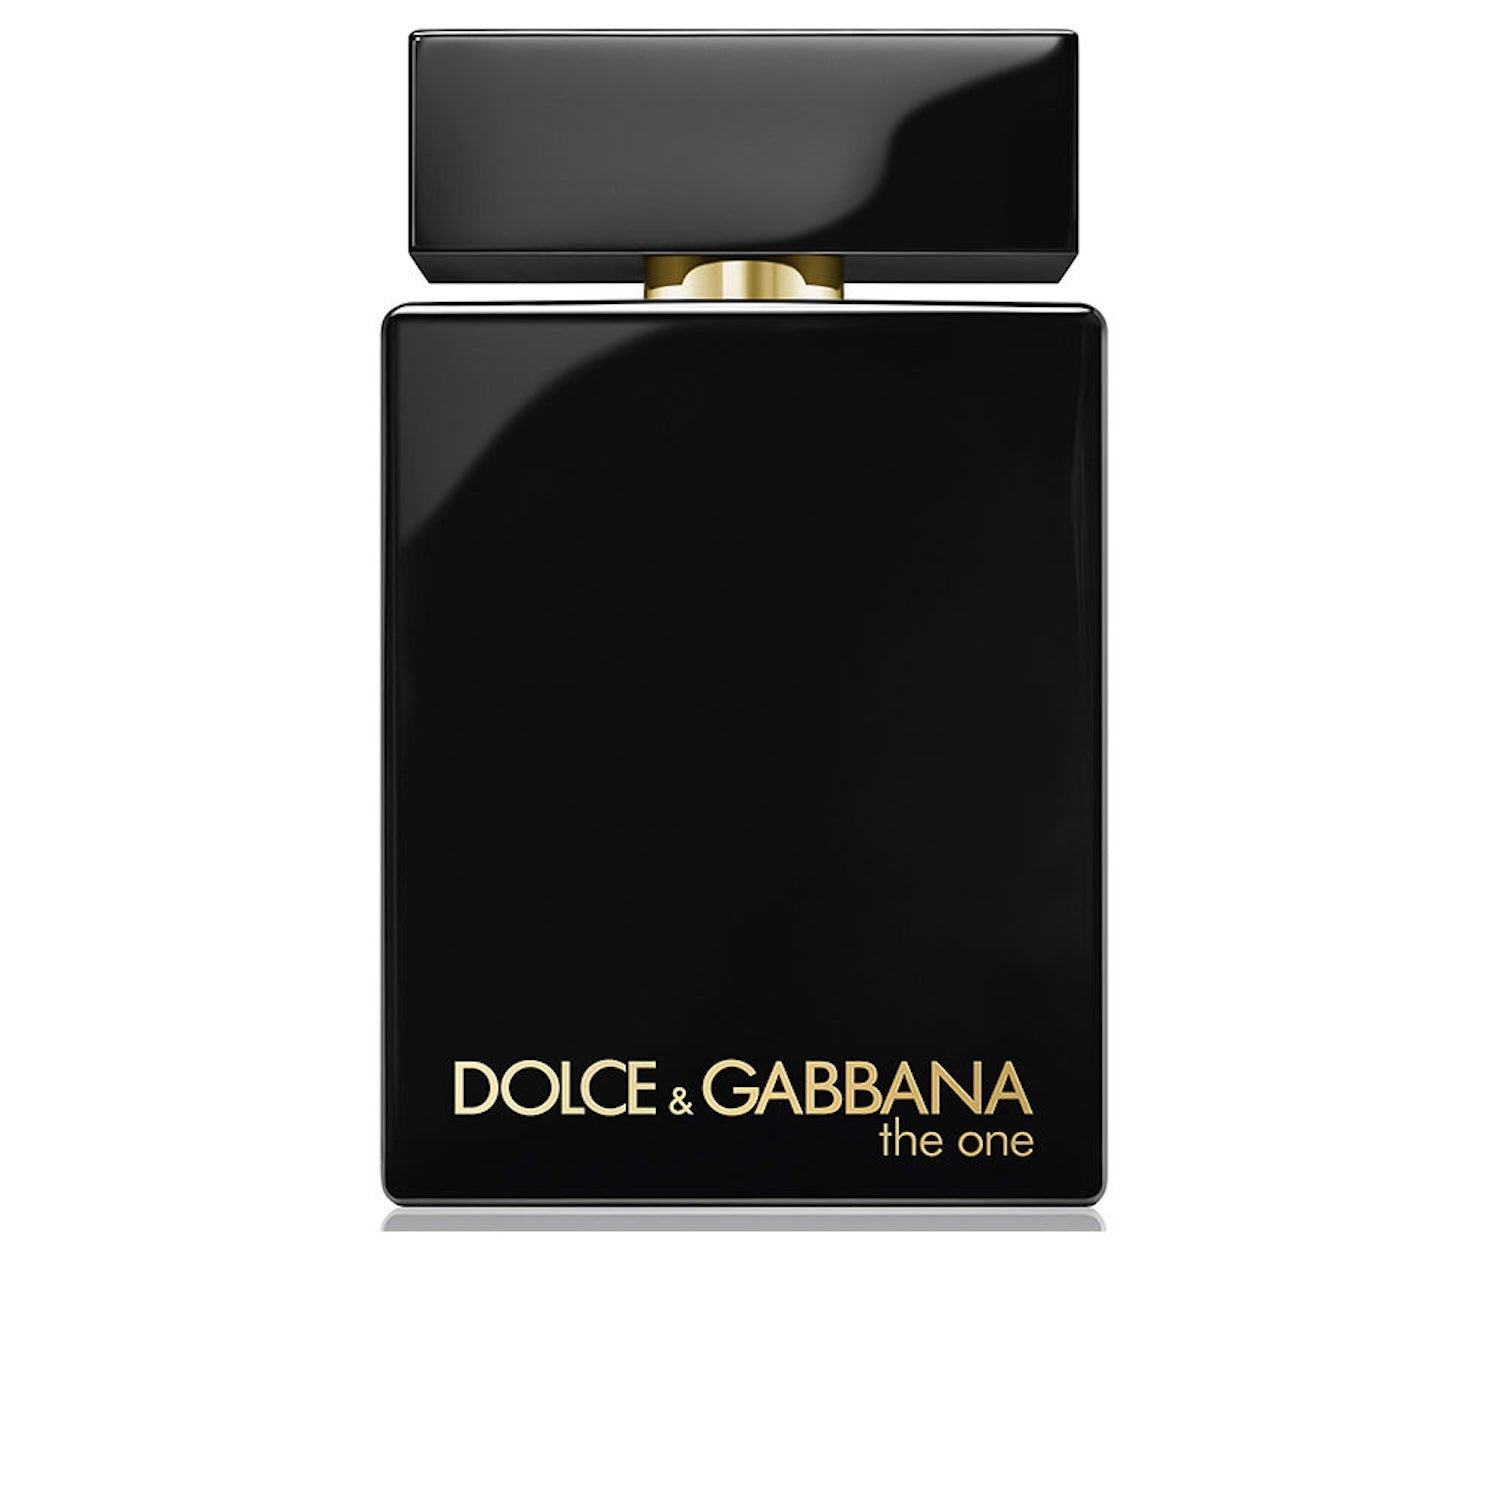 DOLCE GABBANA   THE ONE FOR MEN edp intensiver Dampf